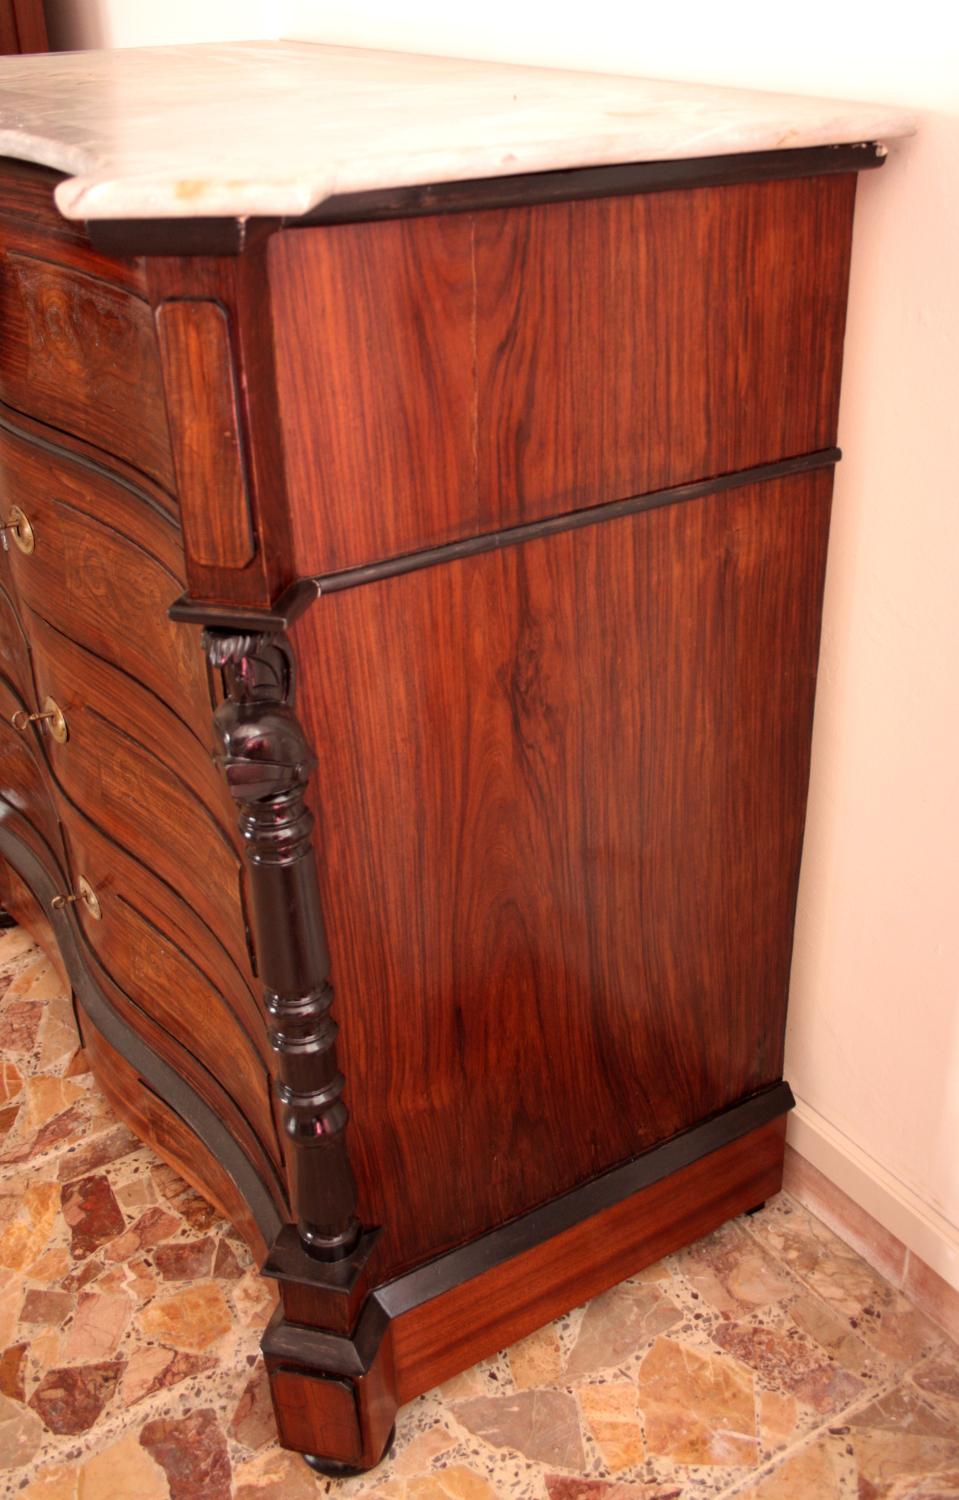 Italian Classical Chest of Drawers Mid 19th Century Commode Ebonized For Sale